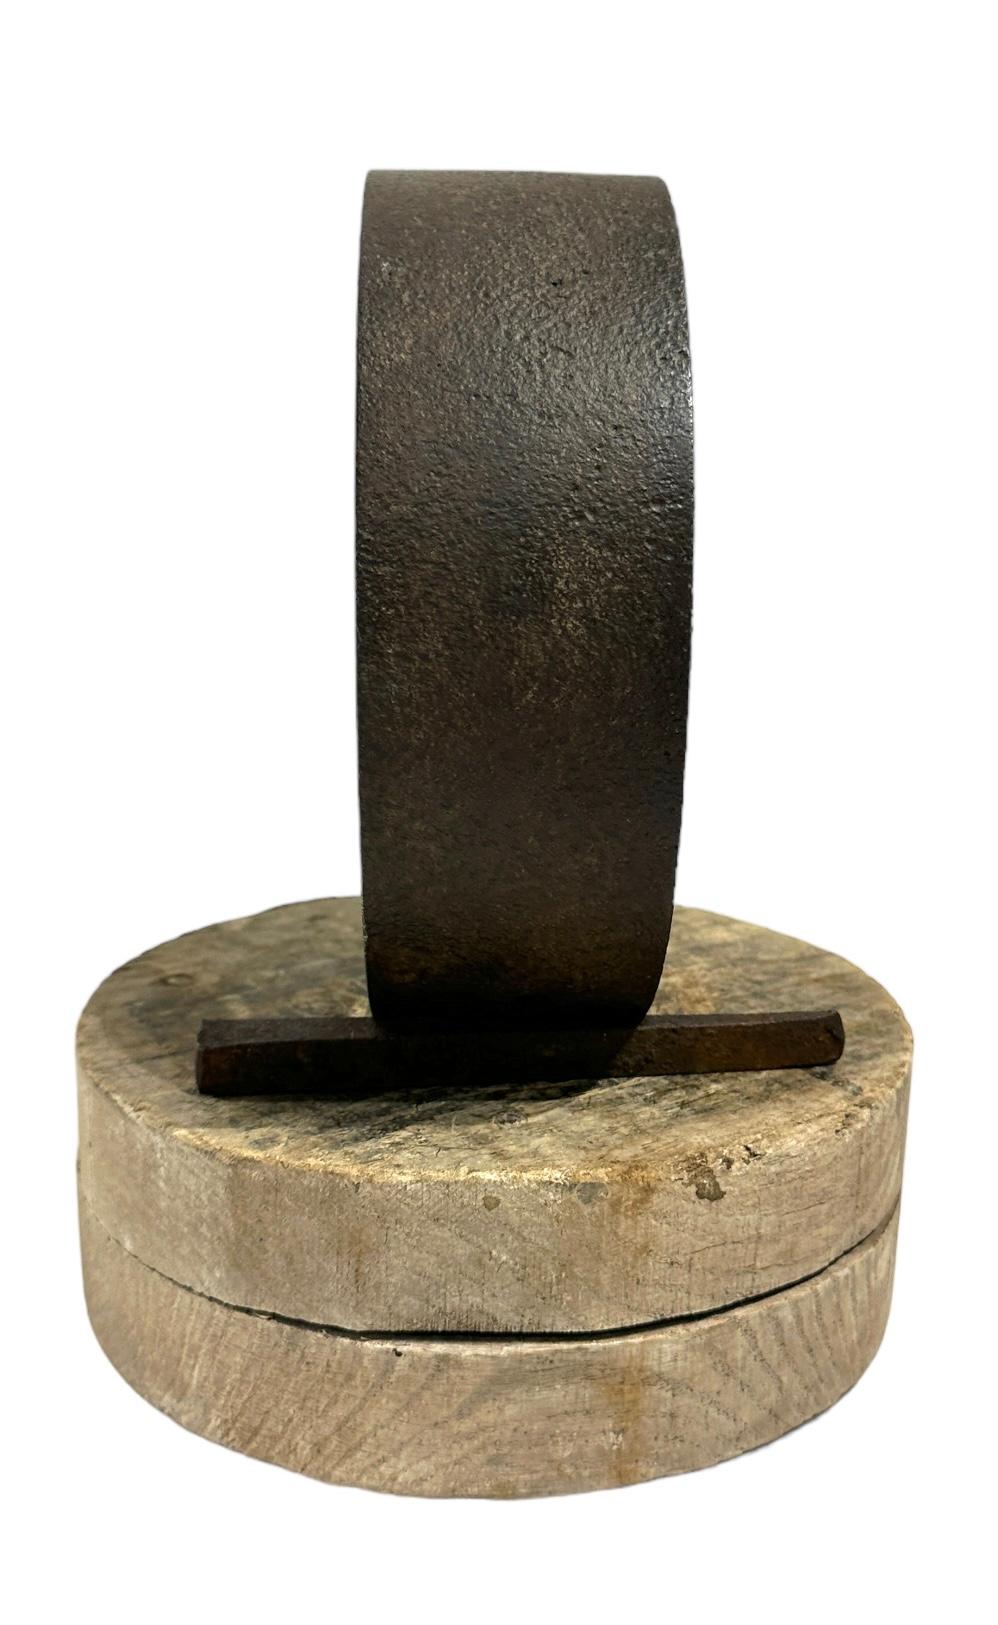 American Found and Salvaged Steel with Wooden Industrial Objects